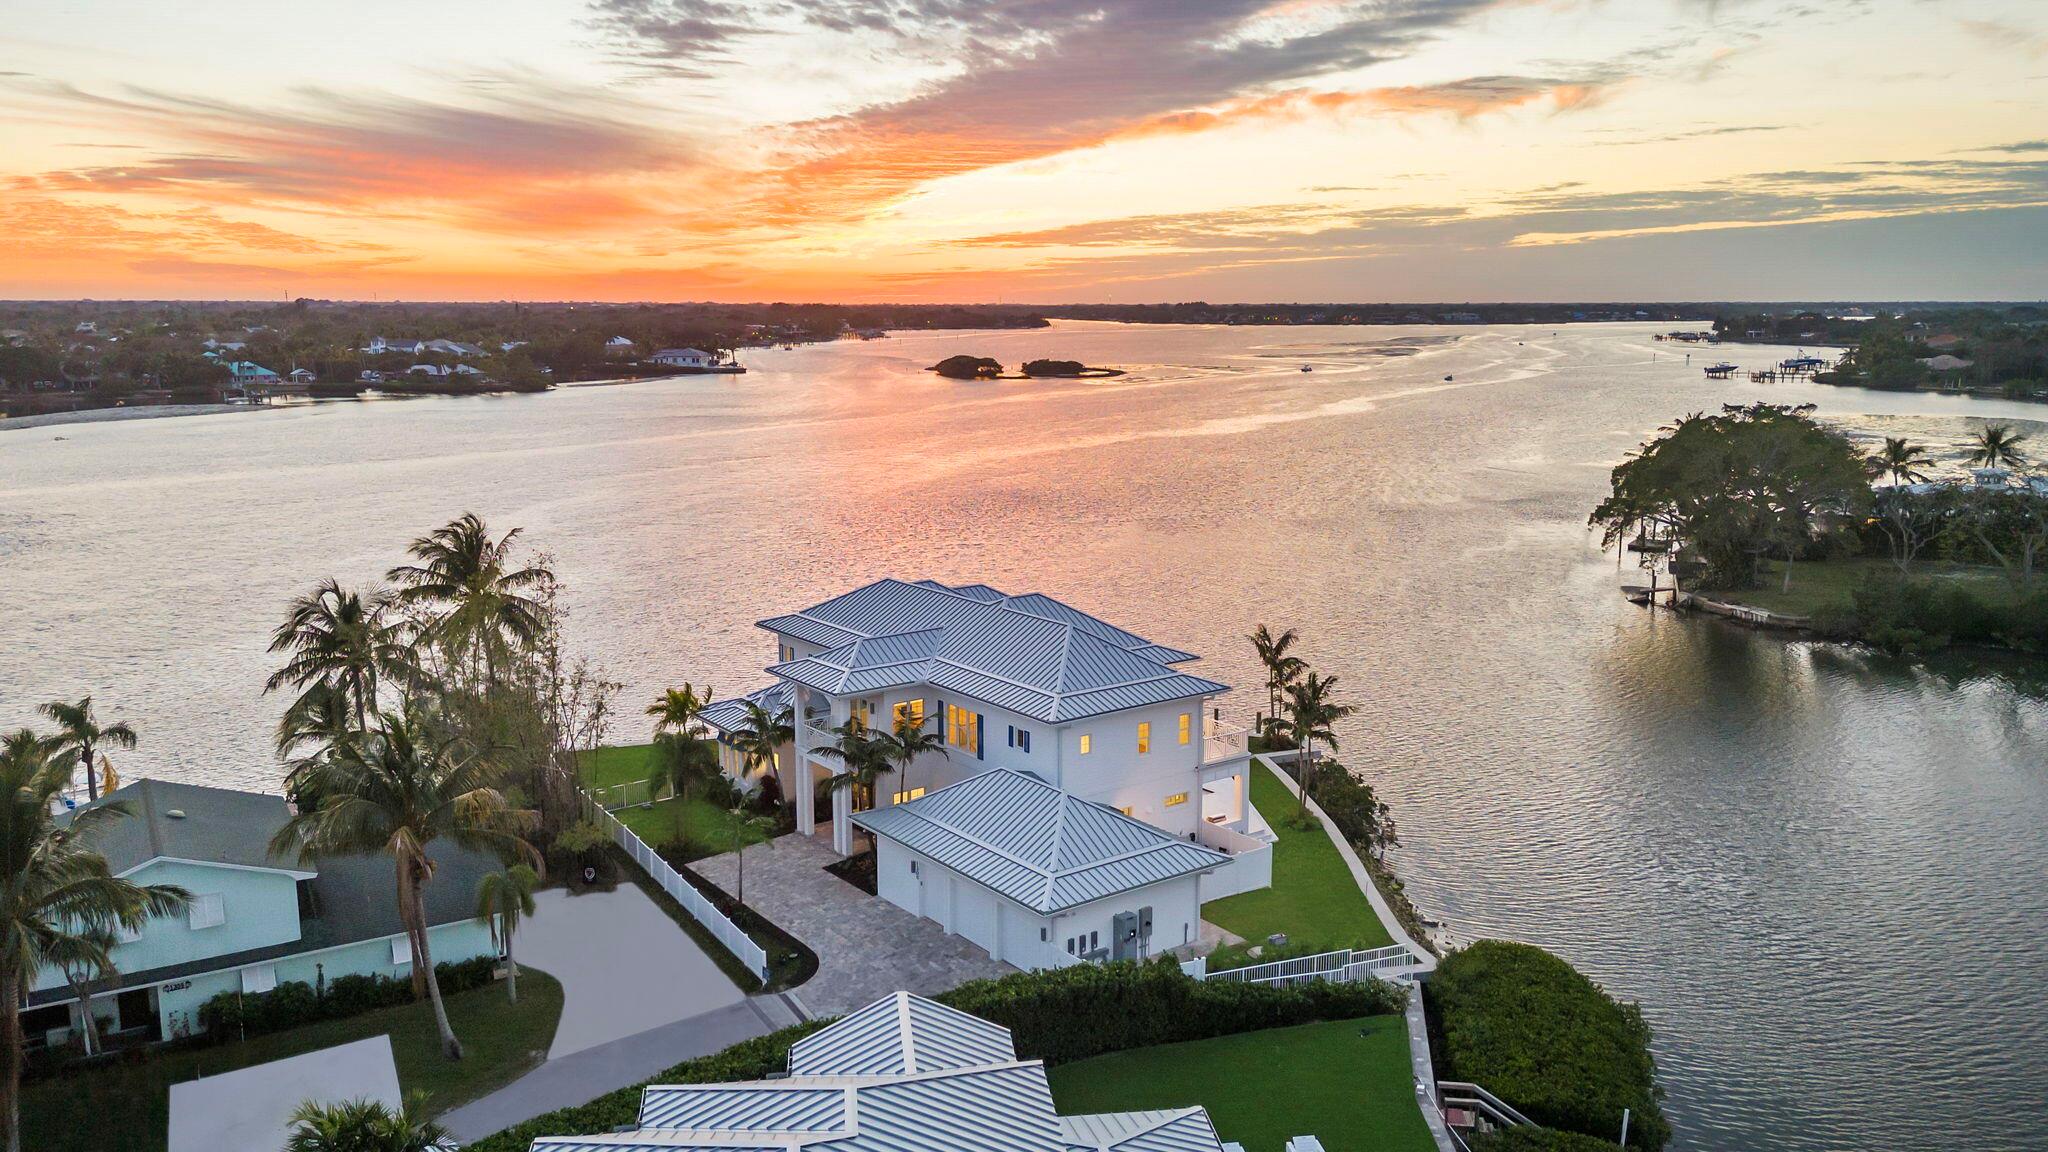 Experience the epitome of waterfront living with this dreamy sunset lover's retreat. Situated serenely along the tranquil Jupiter Inlet, this property captivates with its sprawling 265 feet of aqua-blue waterfront point lot, offering unparalleled views of the majestic Loxahatchee River. Crafted in exquisite West Indies design, this two-story new construction masterpiece showcases meticulous CBS construction from top to bottom, fortified with Icynene insulation and Acoustiblok installation. Enhanced with high-impact windows and doors, your peace of mind is assured.Within, discover the convenience of two kitchens, two living rooms, two laundry rooms and with SONO surround sound speakers. Step outside to indulge in the heated and chilled pool and spa, where every moment is framed by